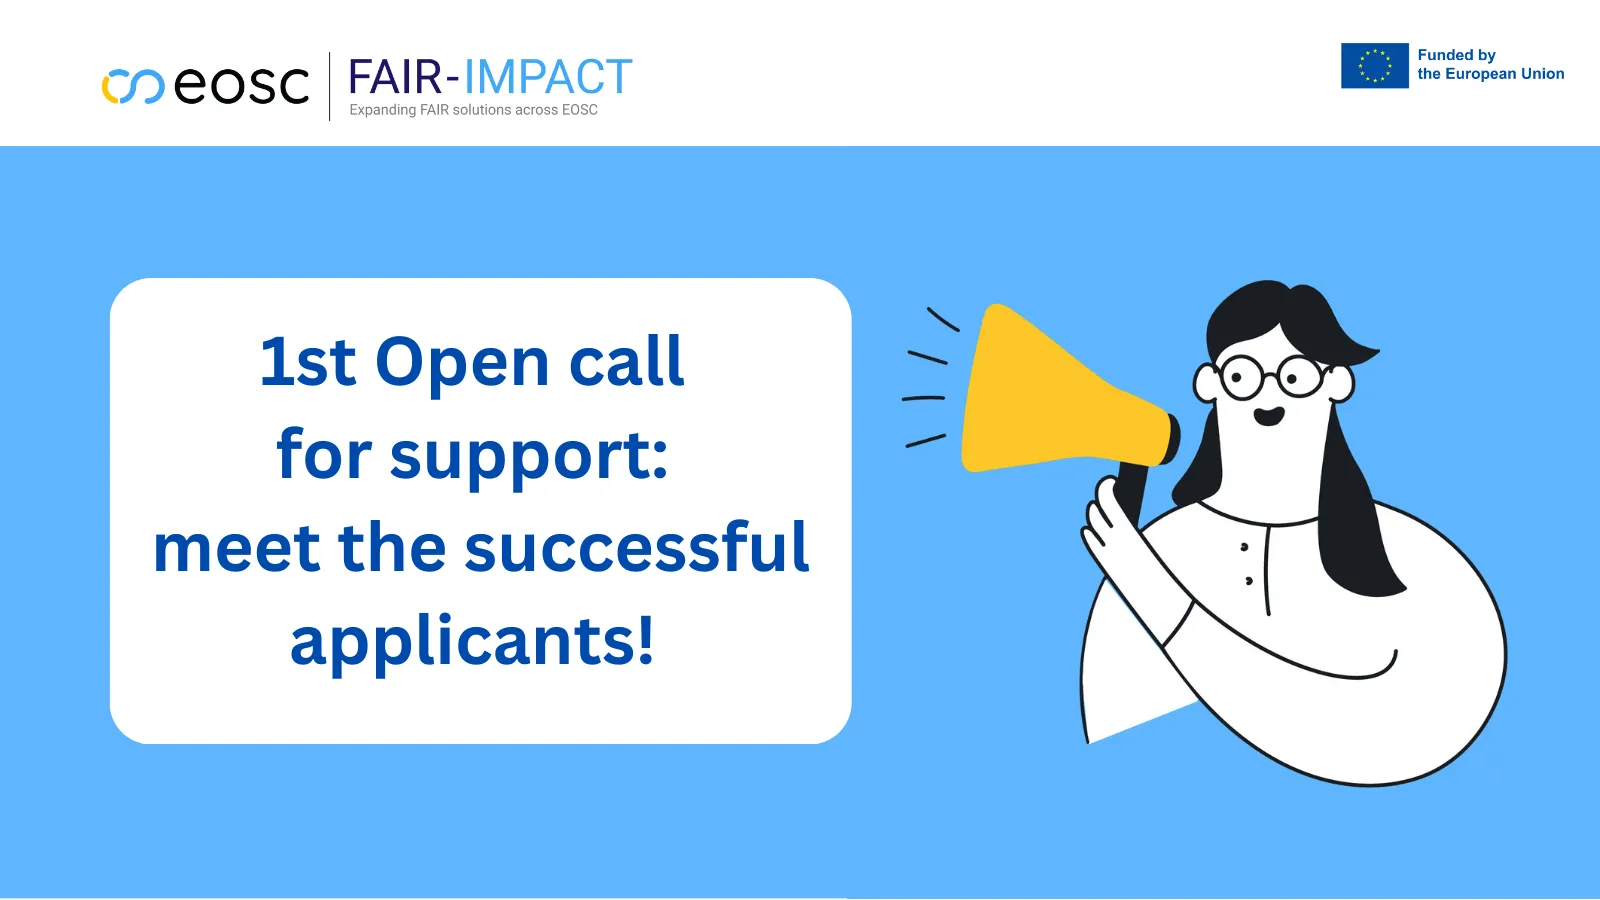 EOSC and FAIR-IMPACT logos with text '1st Open call for support: meet the successful applicants!'